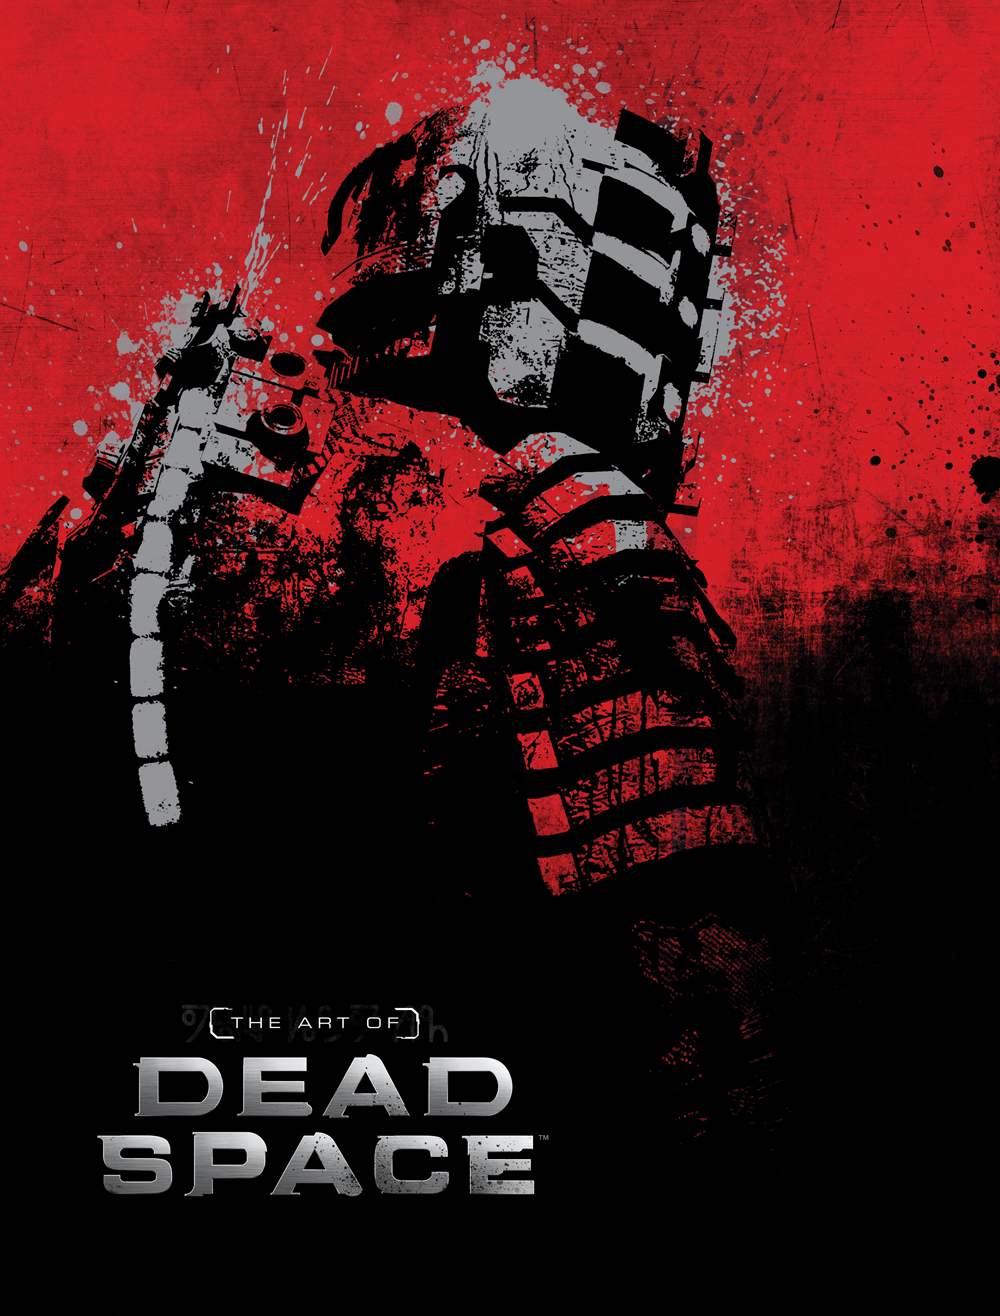 Dead Space: Anthology